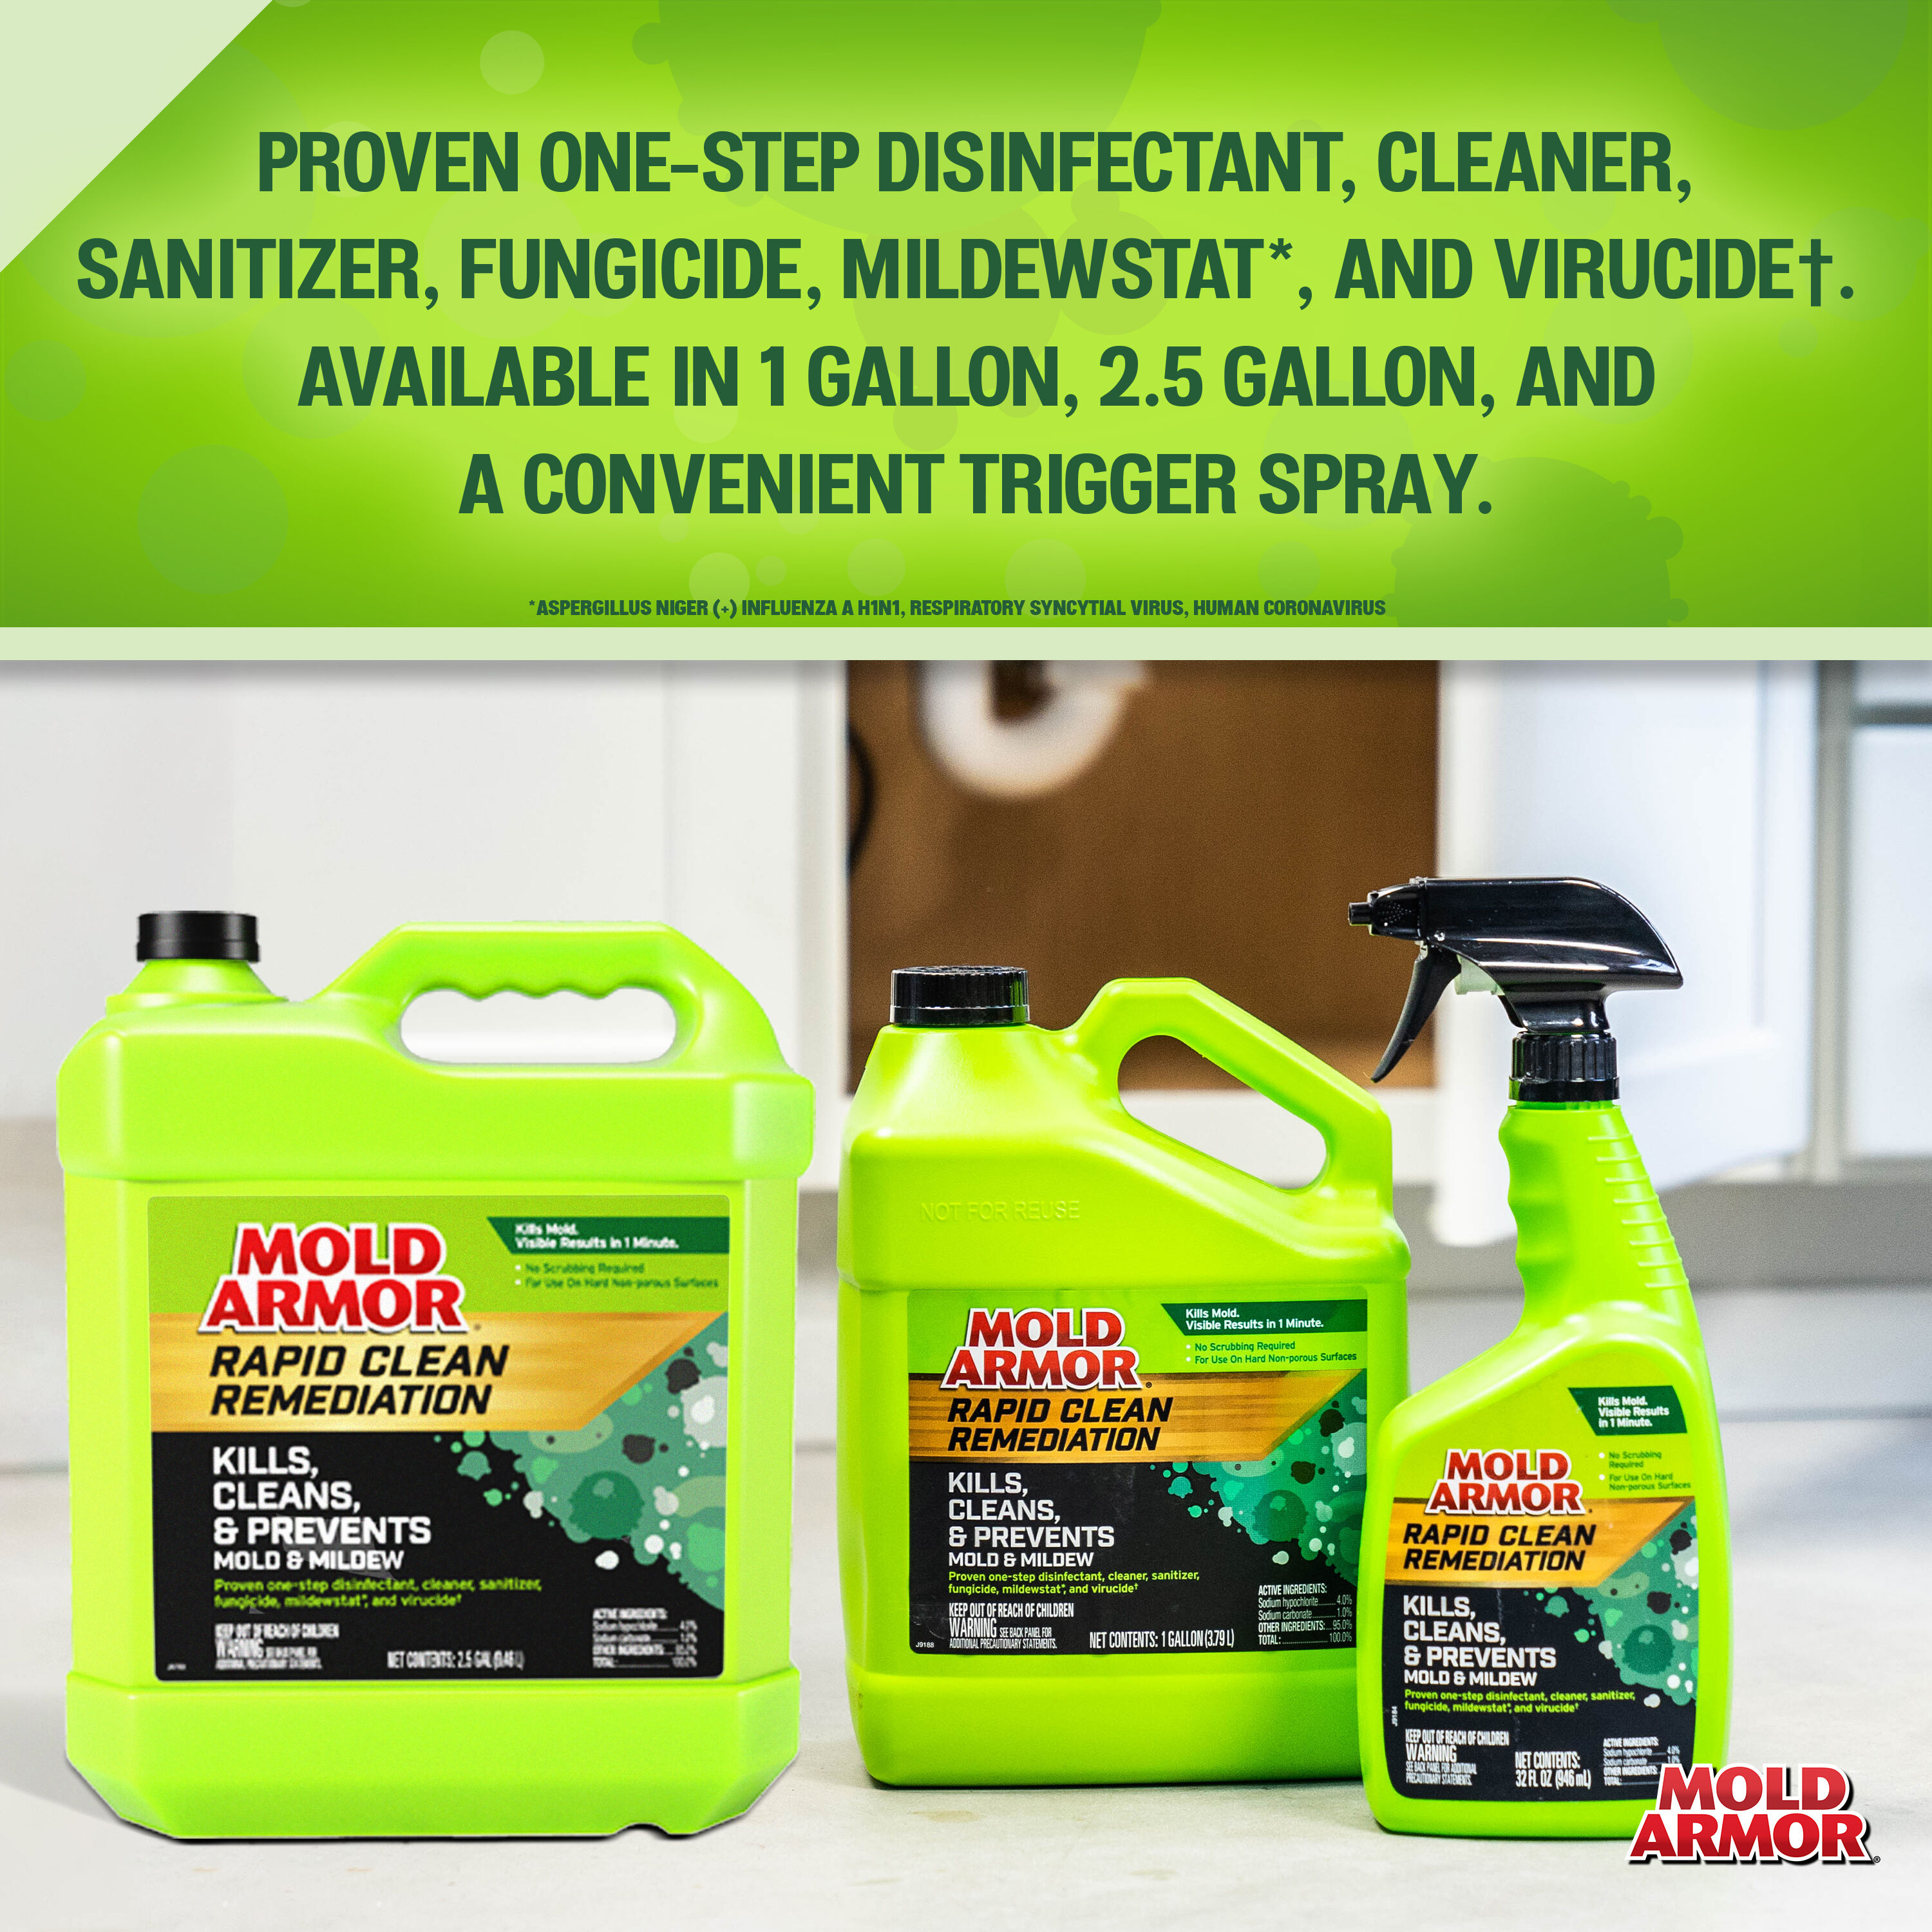 Mold Armor 128 fl oz Mold Remover: Kills, Cleans, and Prevents Mold and  Mildew, One-Step Remediation, Disinfects and Sanitizes in the Mold Removers  department at